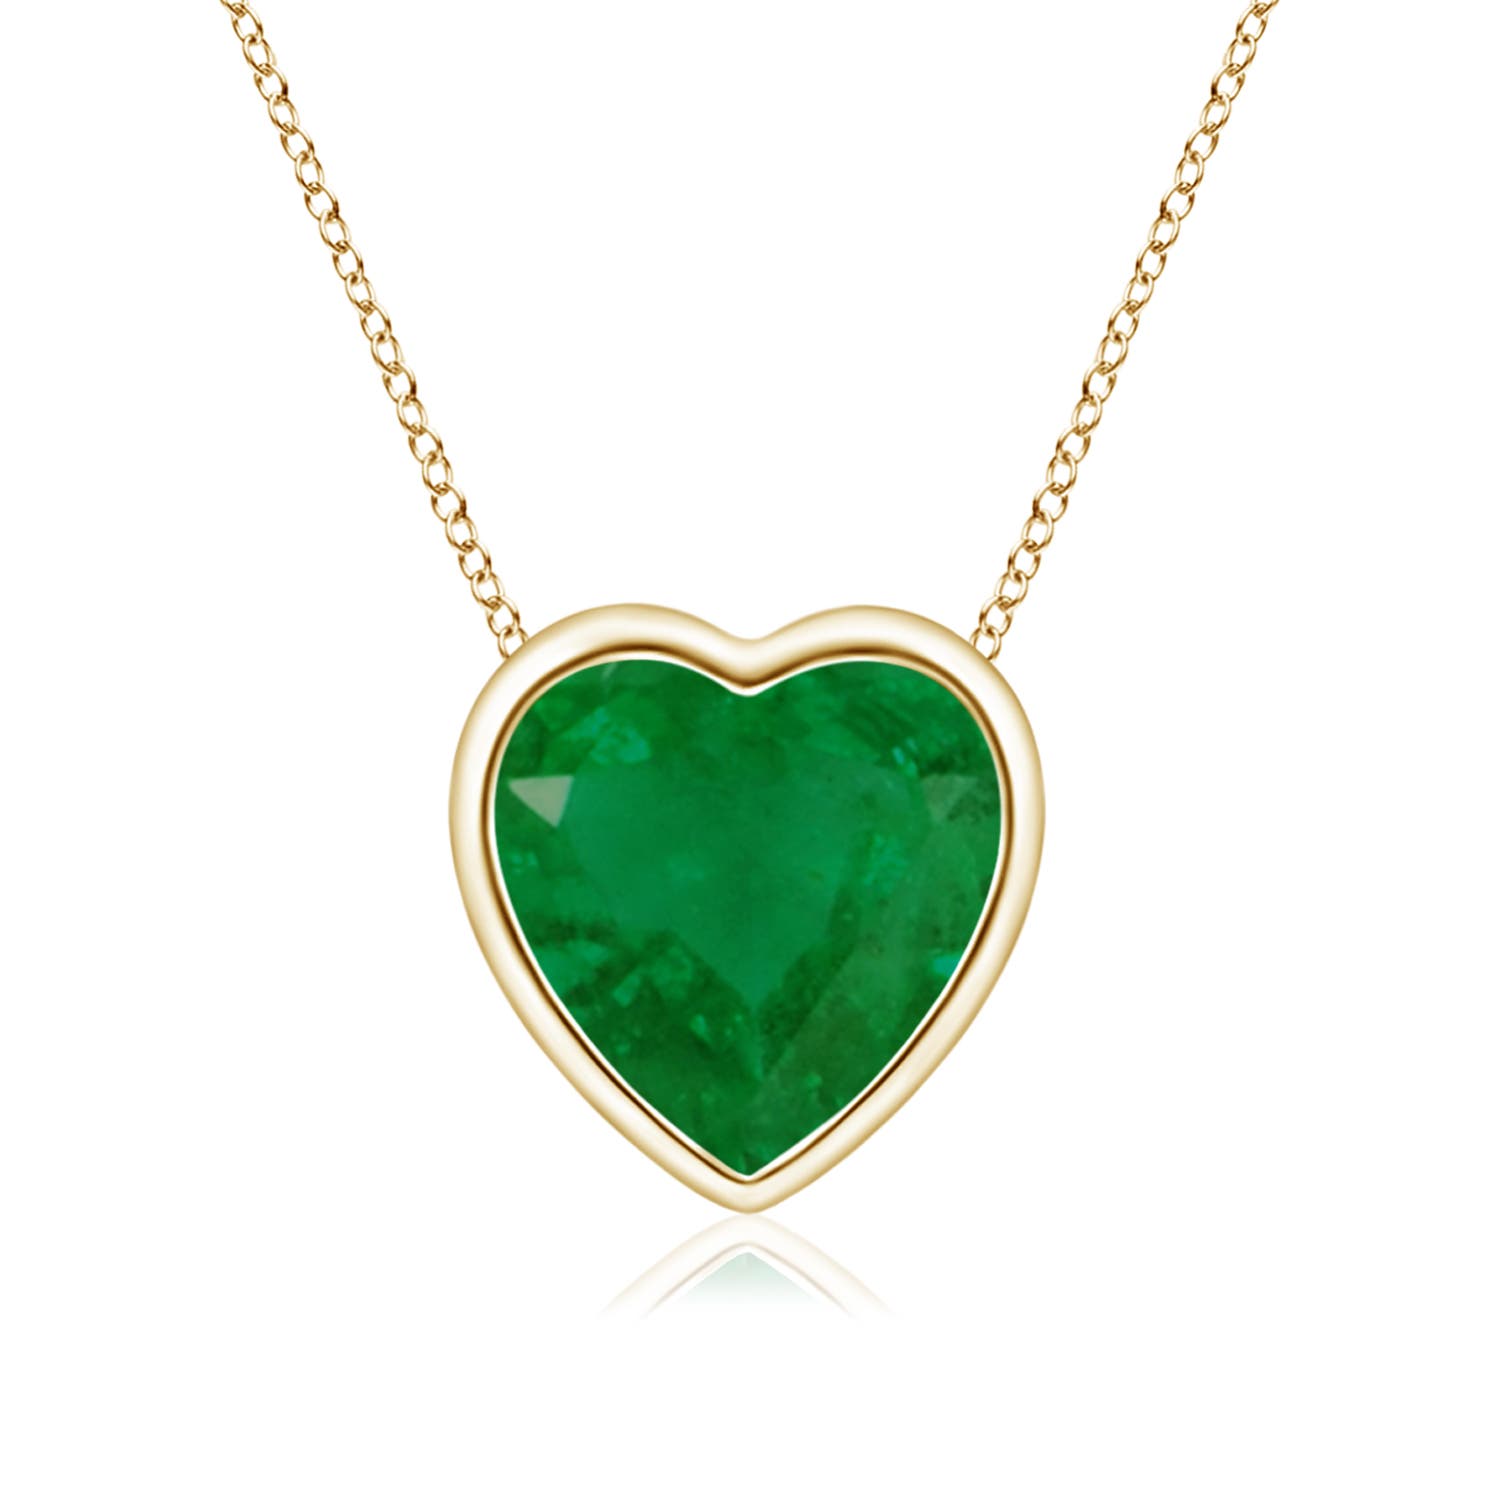 A - Emerald / 0.6 CT / 14 KT Yellow Gold